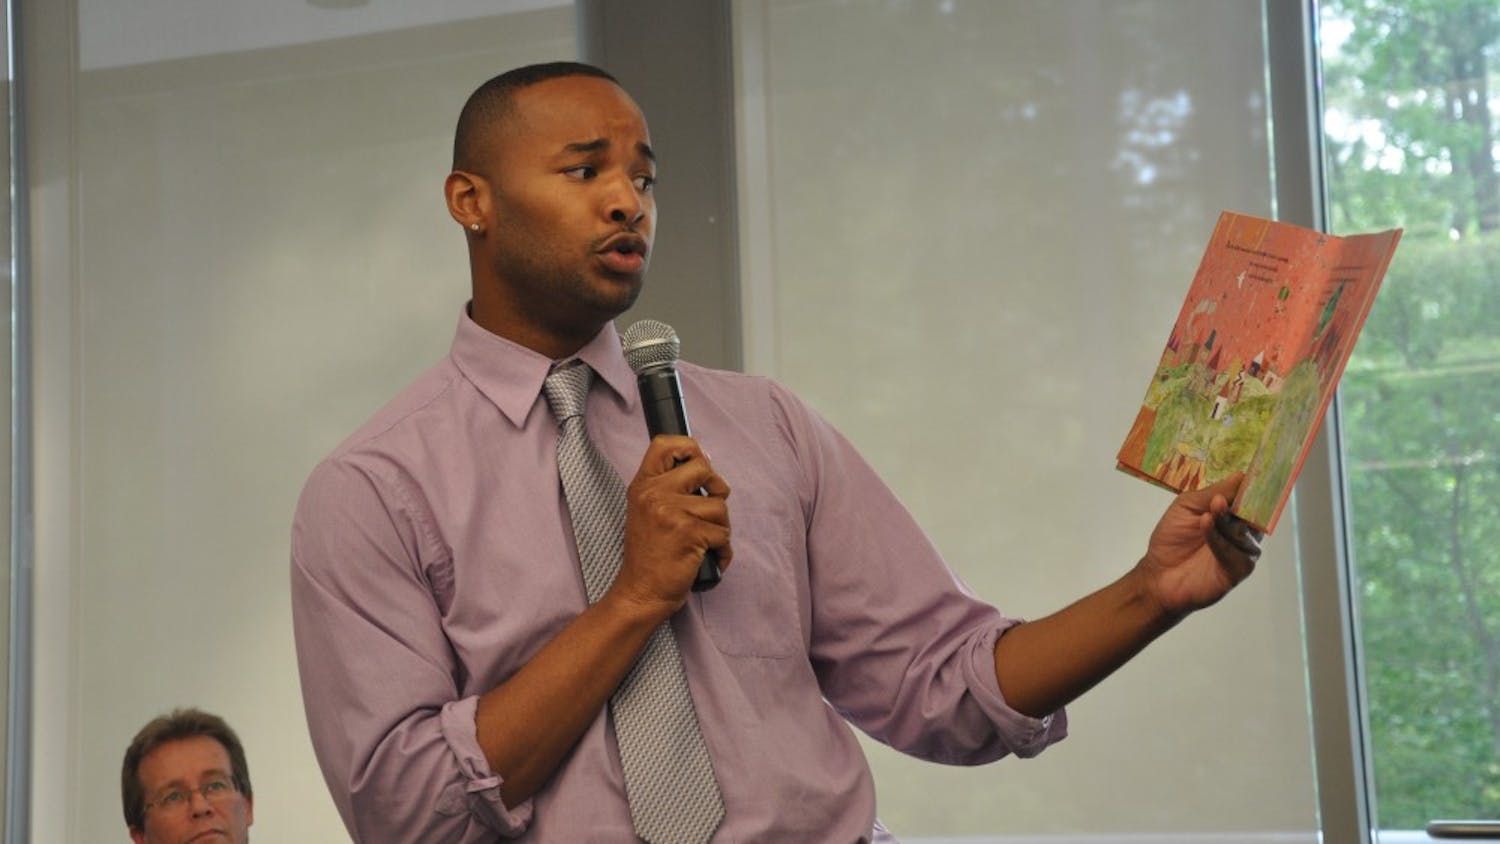 Omar Currie, a former teacher at Efland Cheeks Elementary school, reads from children's book "King and King" at the Chapel Hill Public Library. Currie resigned from the school after a controversy emerged over Currie reading the book, which features a marriage between gay characters, to his third-grade class.